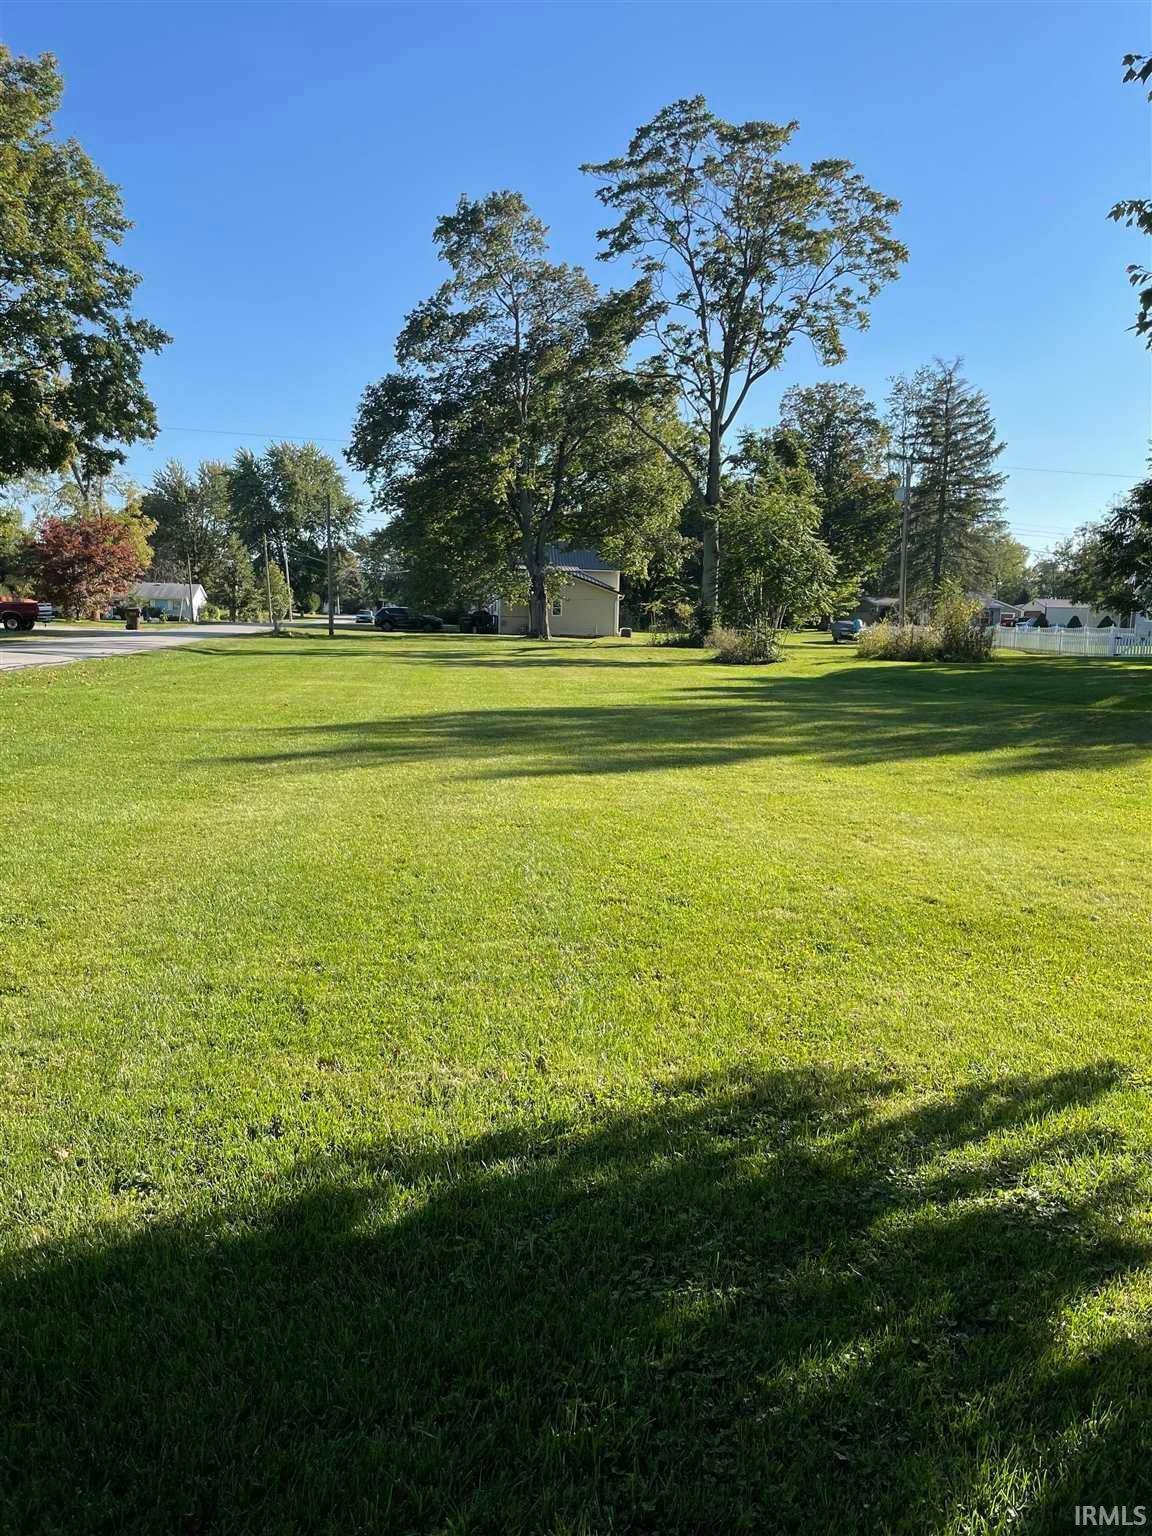 Residential Lots & Land for Sale at E Hobart Street Ashley, Indiana 46705 United States